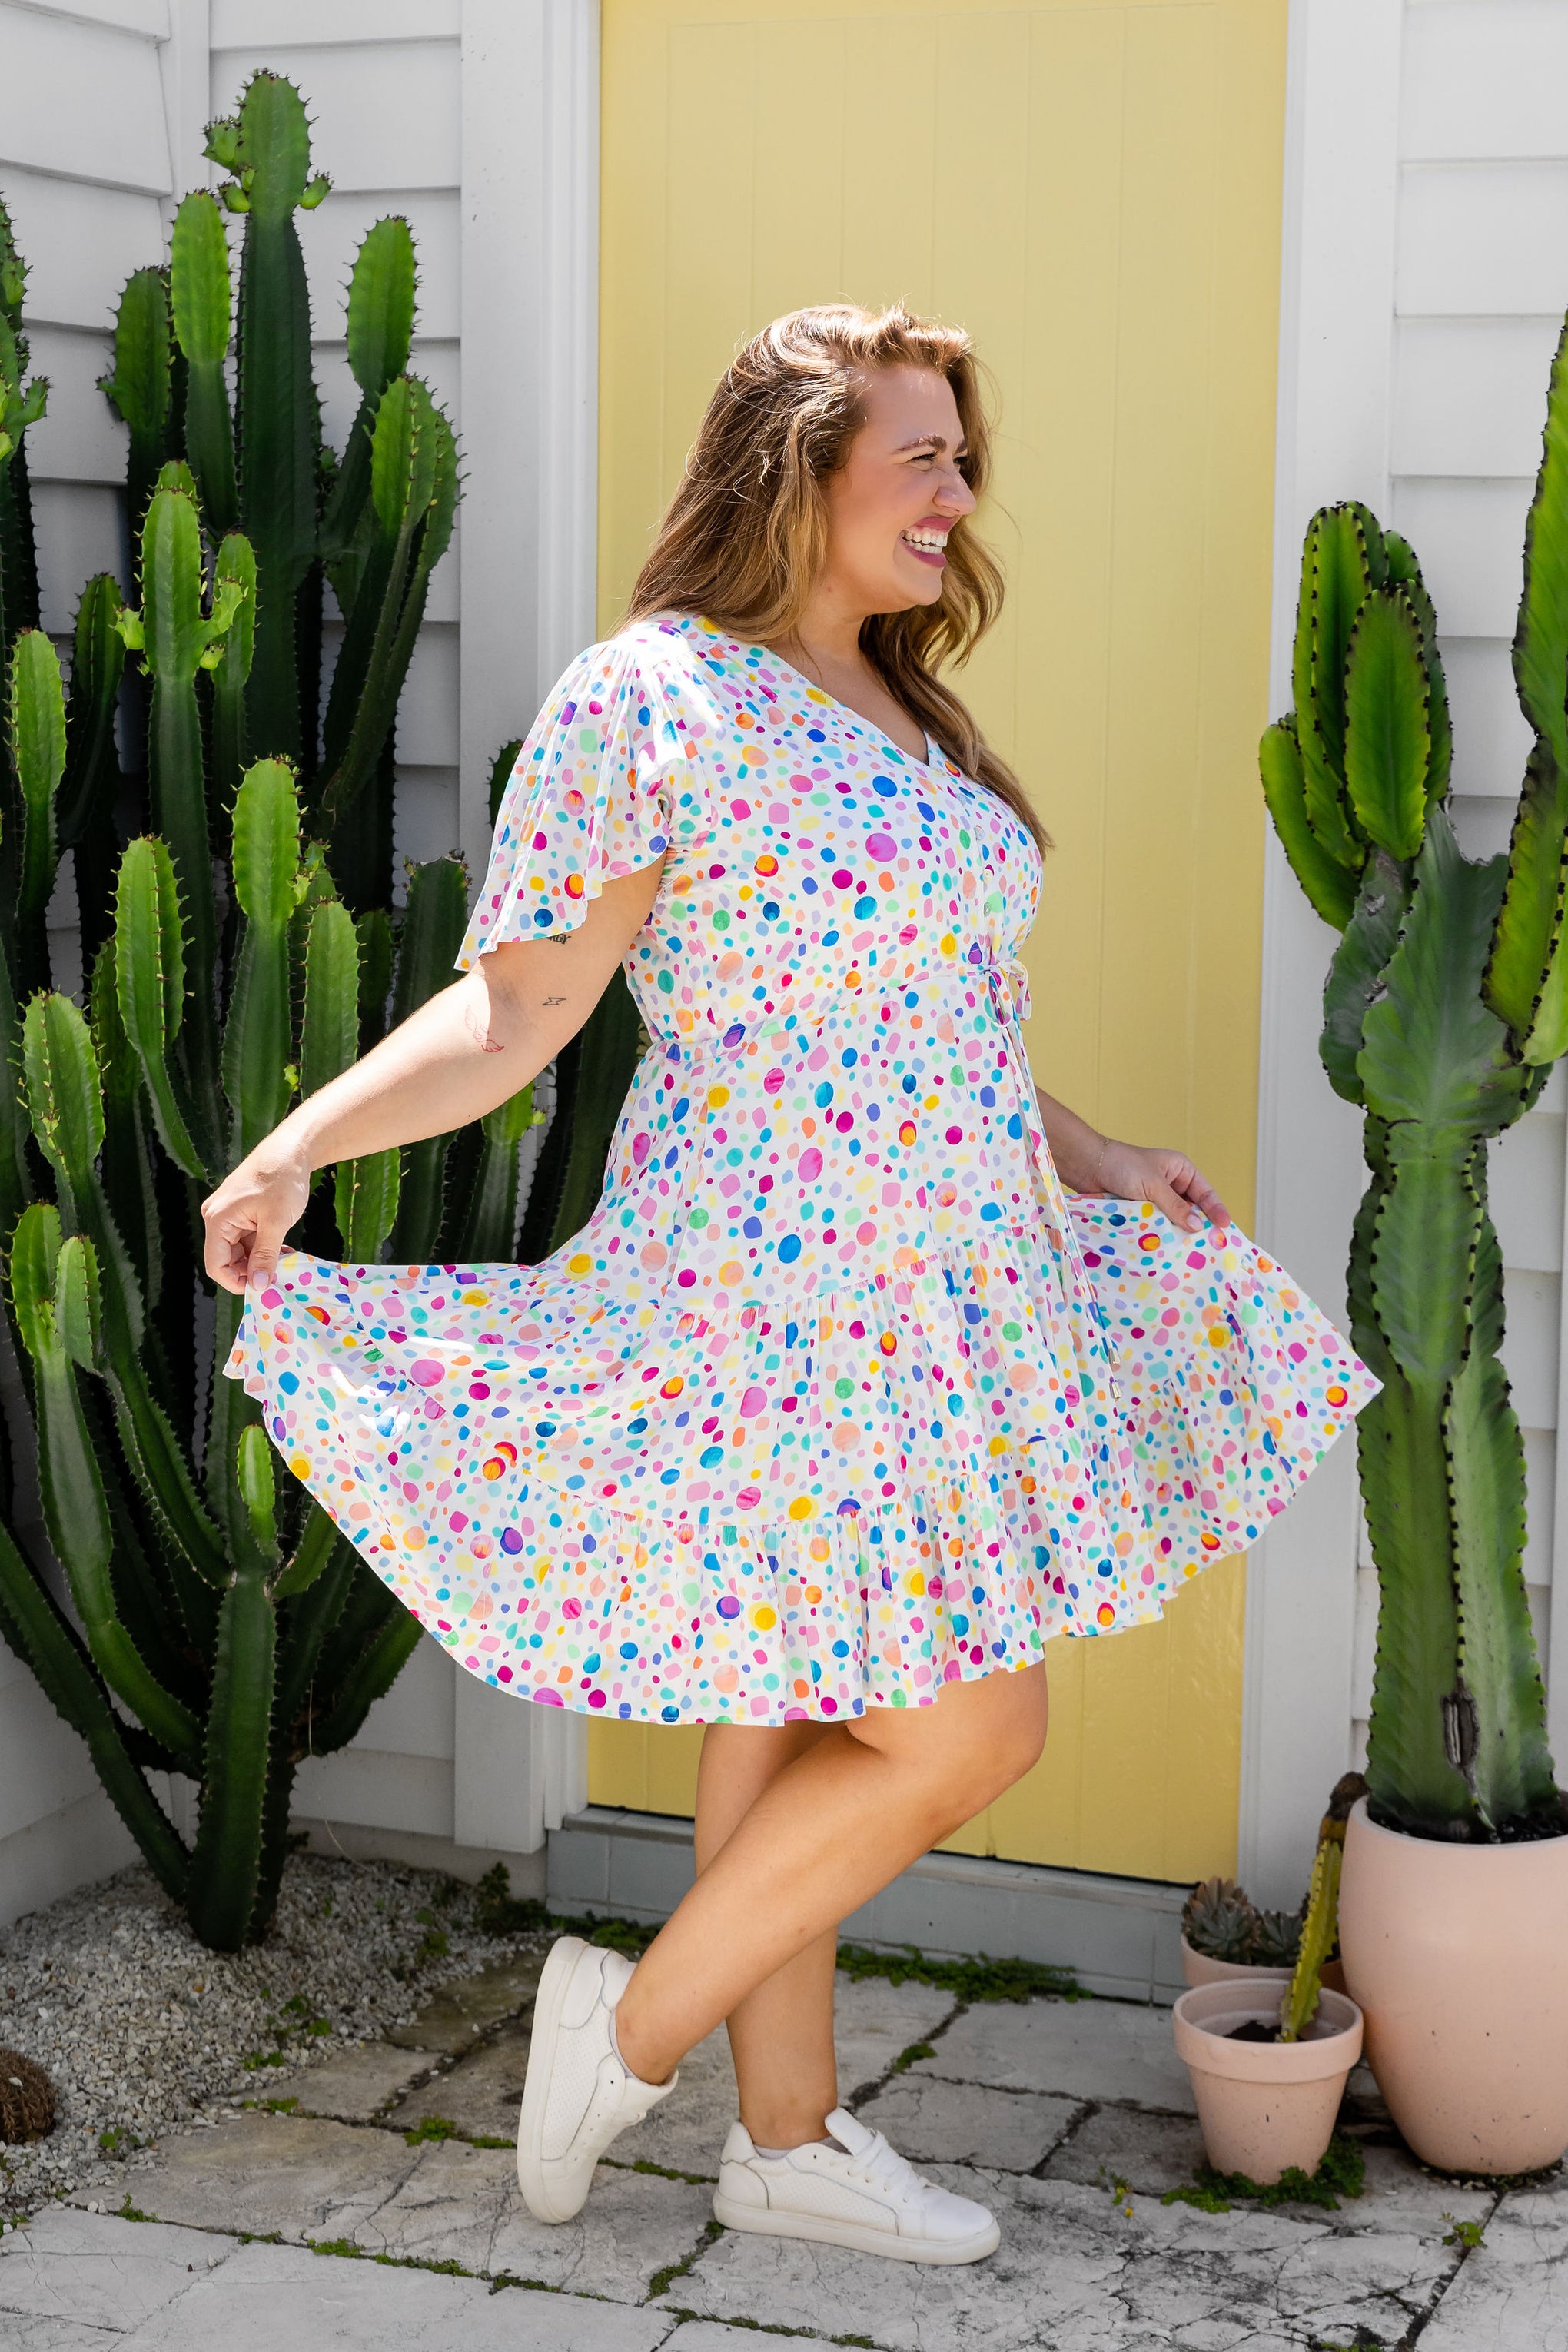 Charlie Multi Spot Dress in White Pebble by Kasey Rainbow